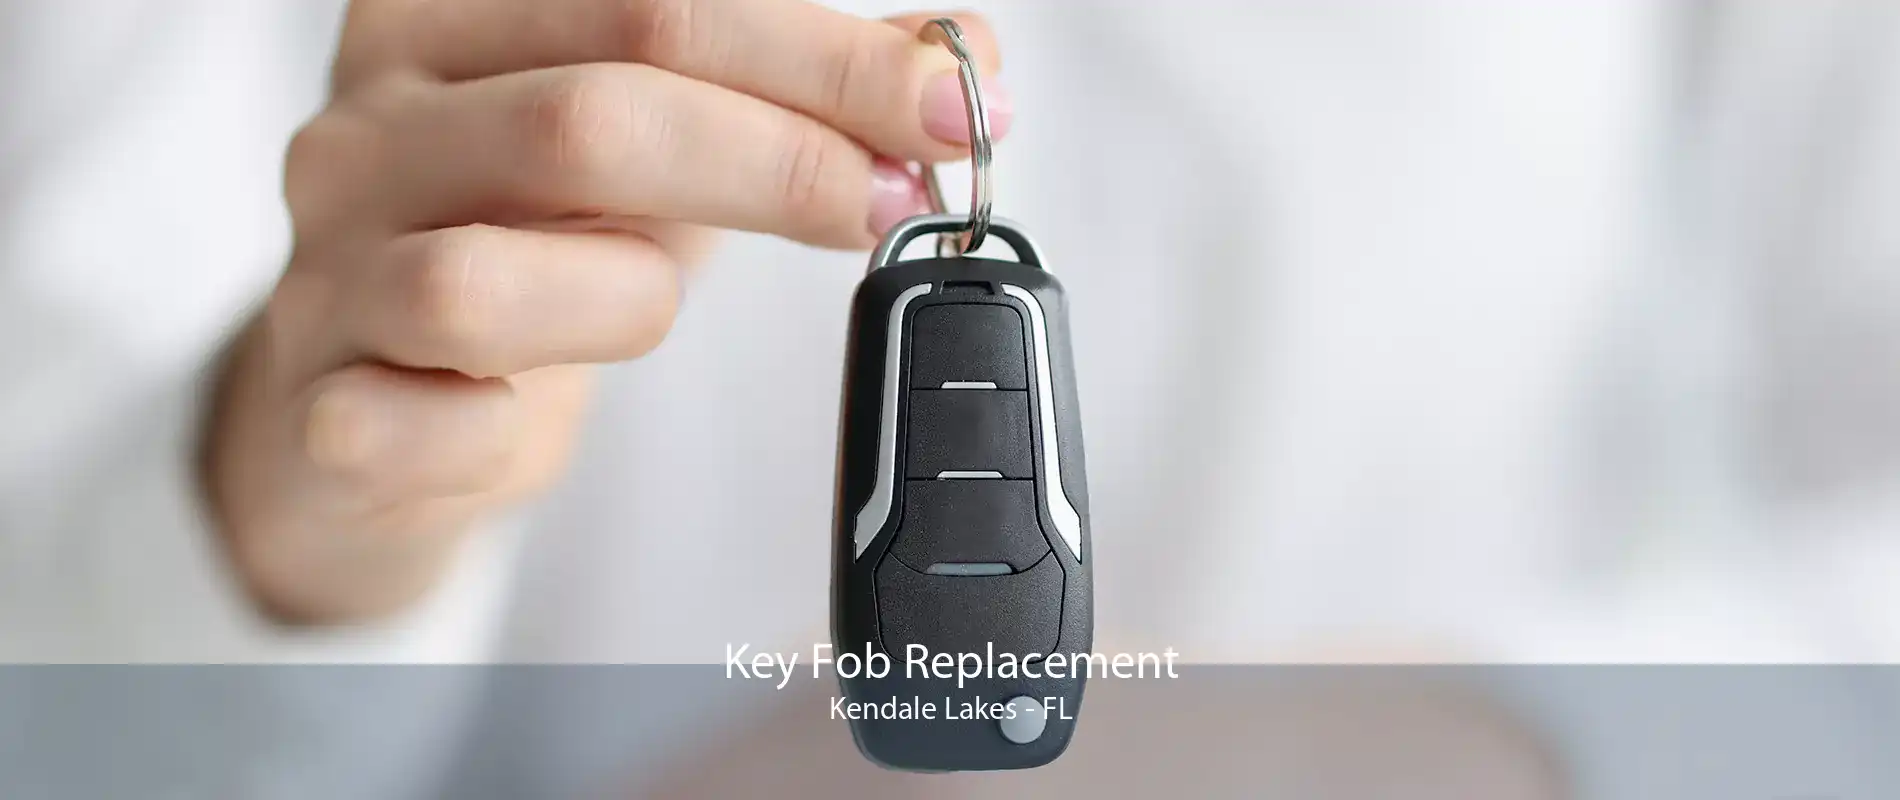 Key Fob Replacement Kendale Lakes - FL